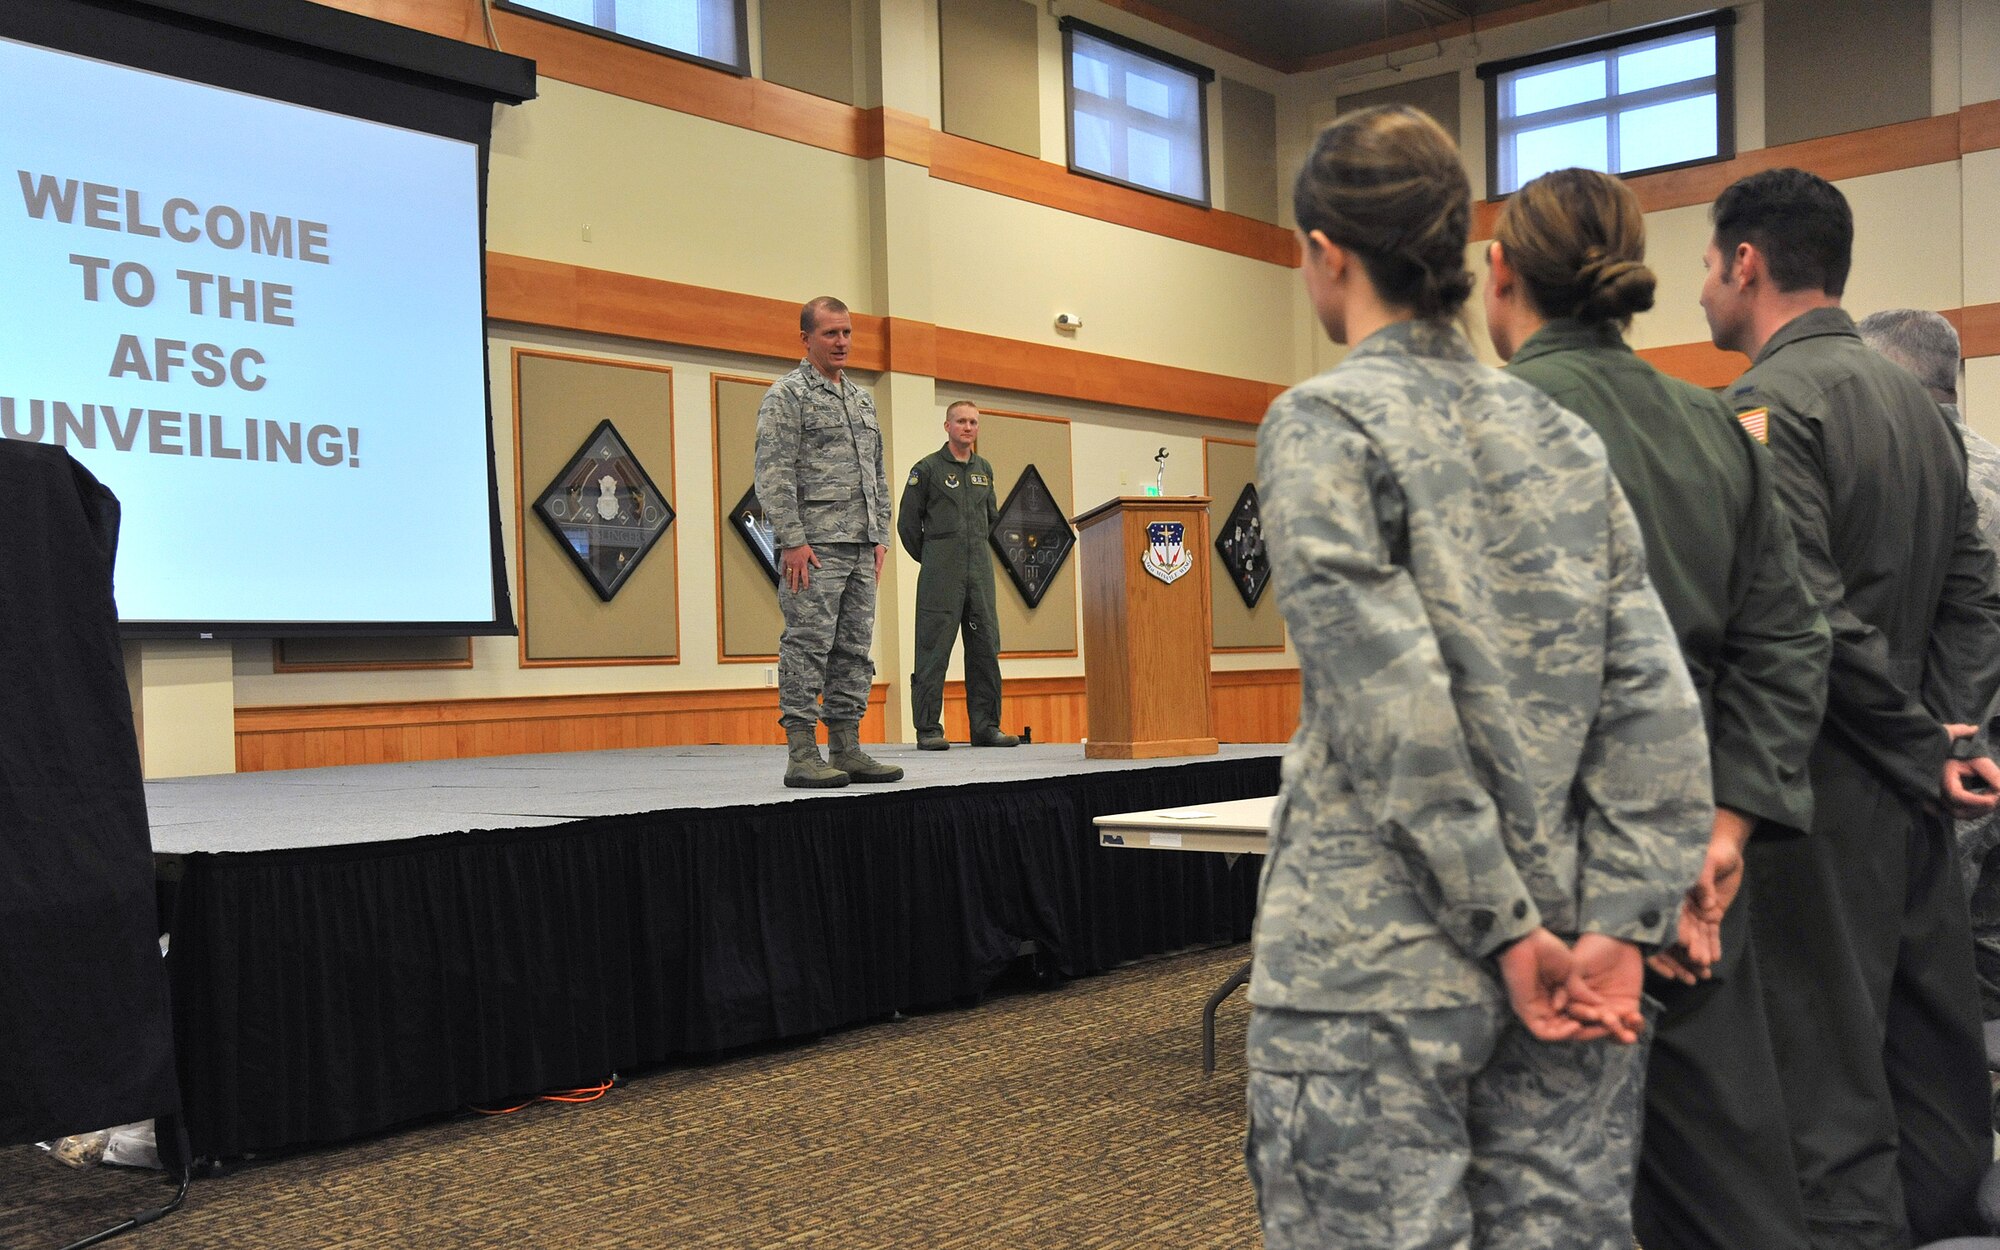 Col. Robert Stanley, 341st Missile Wing commander, talks to Team Malmstrom officers before receiving their new career during an Air Force Specialty Code unveiling at the Grizzly Bend on Feb. 14. Nearly 20 missileers received a new AFSC under nuclear, space, air craft maintenance or cyber operations. The Air Force split the space and missile career field to give officers more focused development in their respective areas. The split, affecting more than 3,000 officers Air Force-wide, aims to strengthen the nuclear enterprise. (U.S. Air Force photo/John Turner)